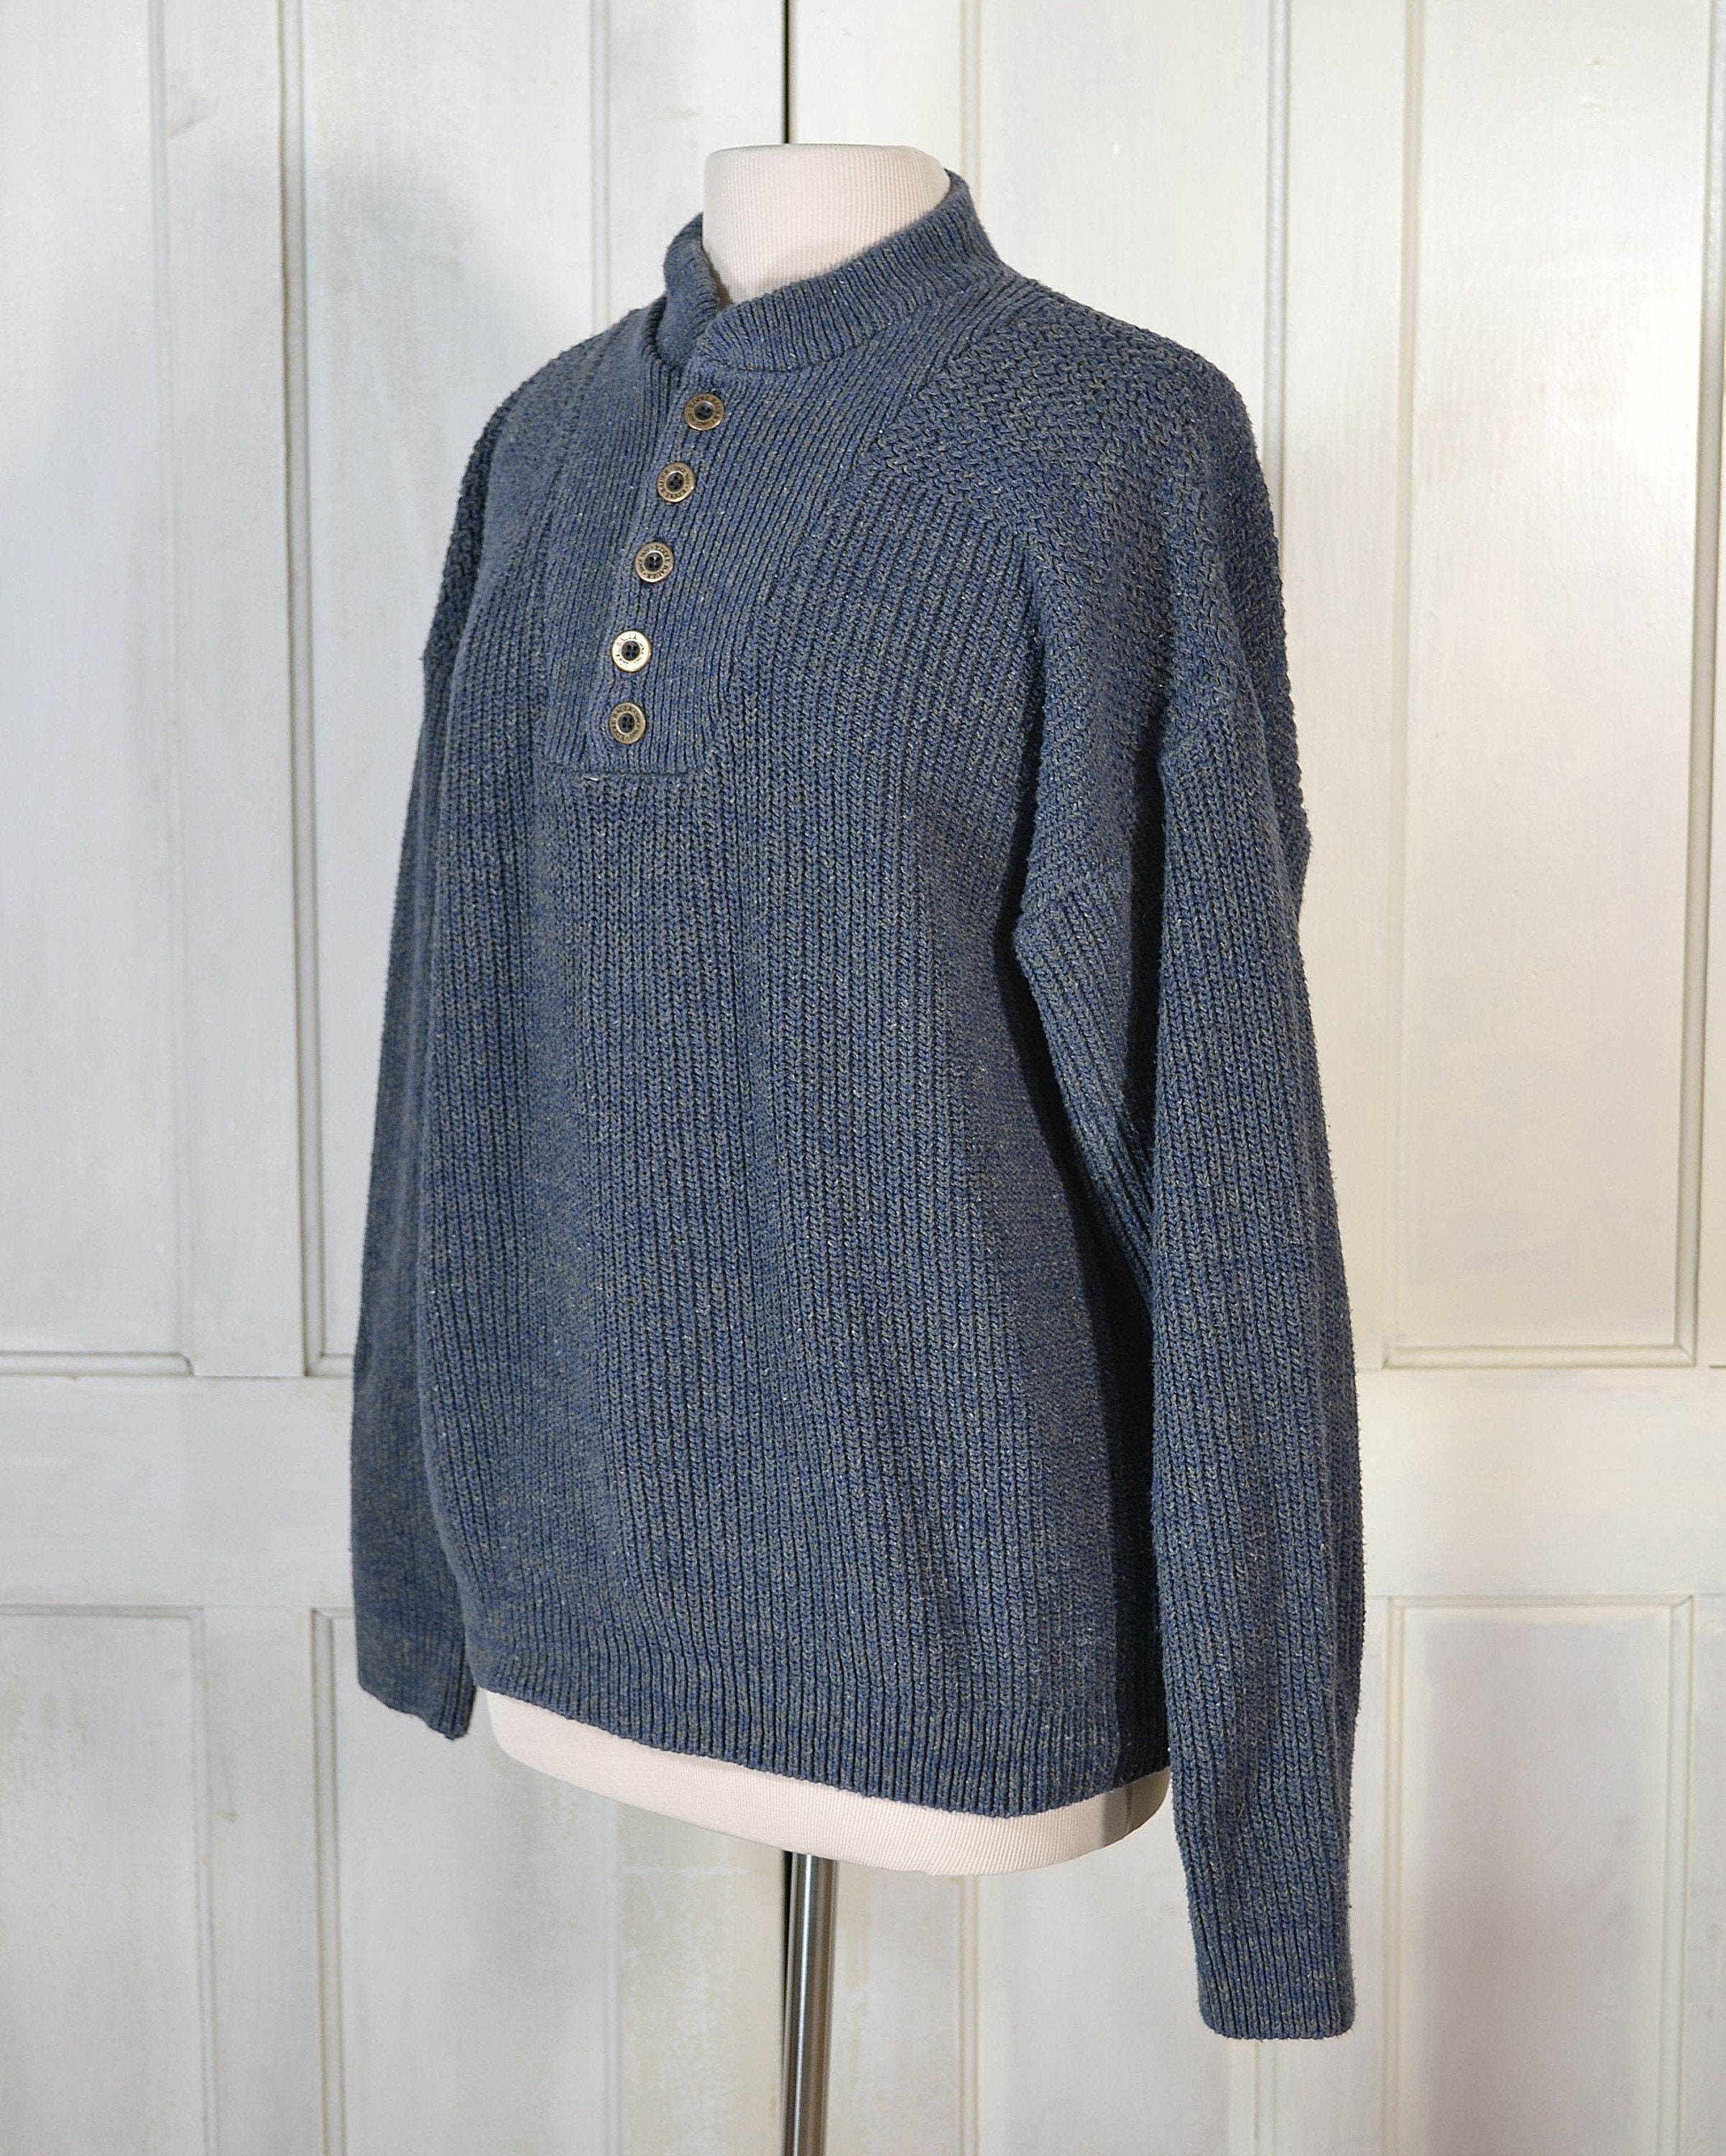 90s Vintage Military Style Sweater Chunky Cotton Knit Henley | Etsy